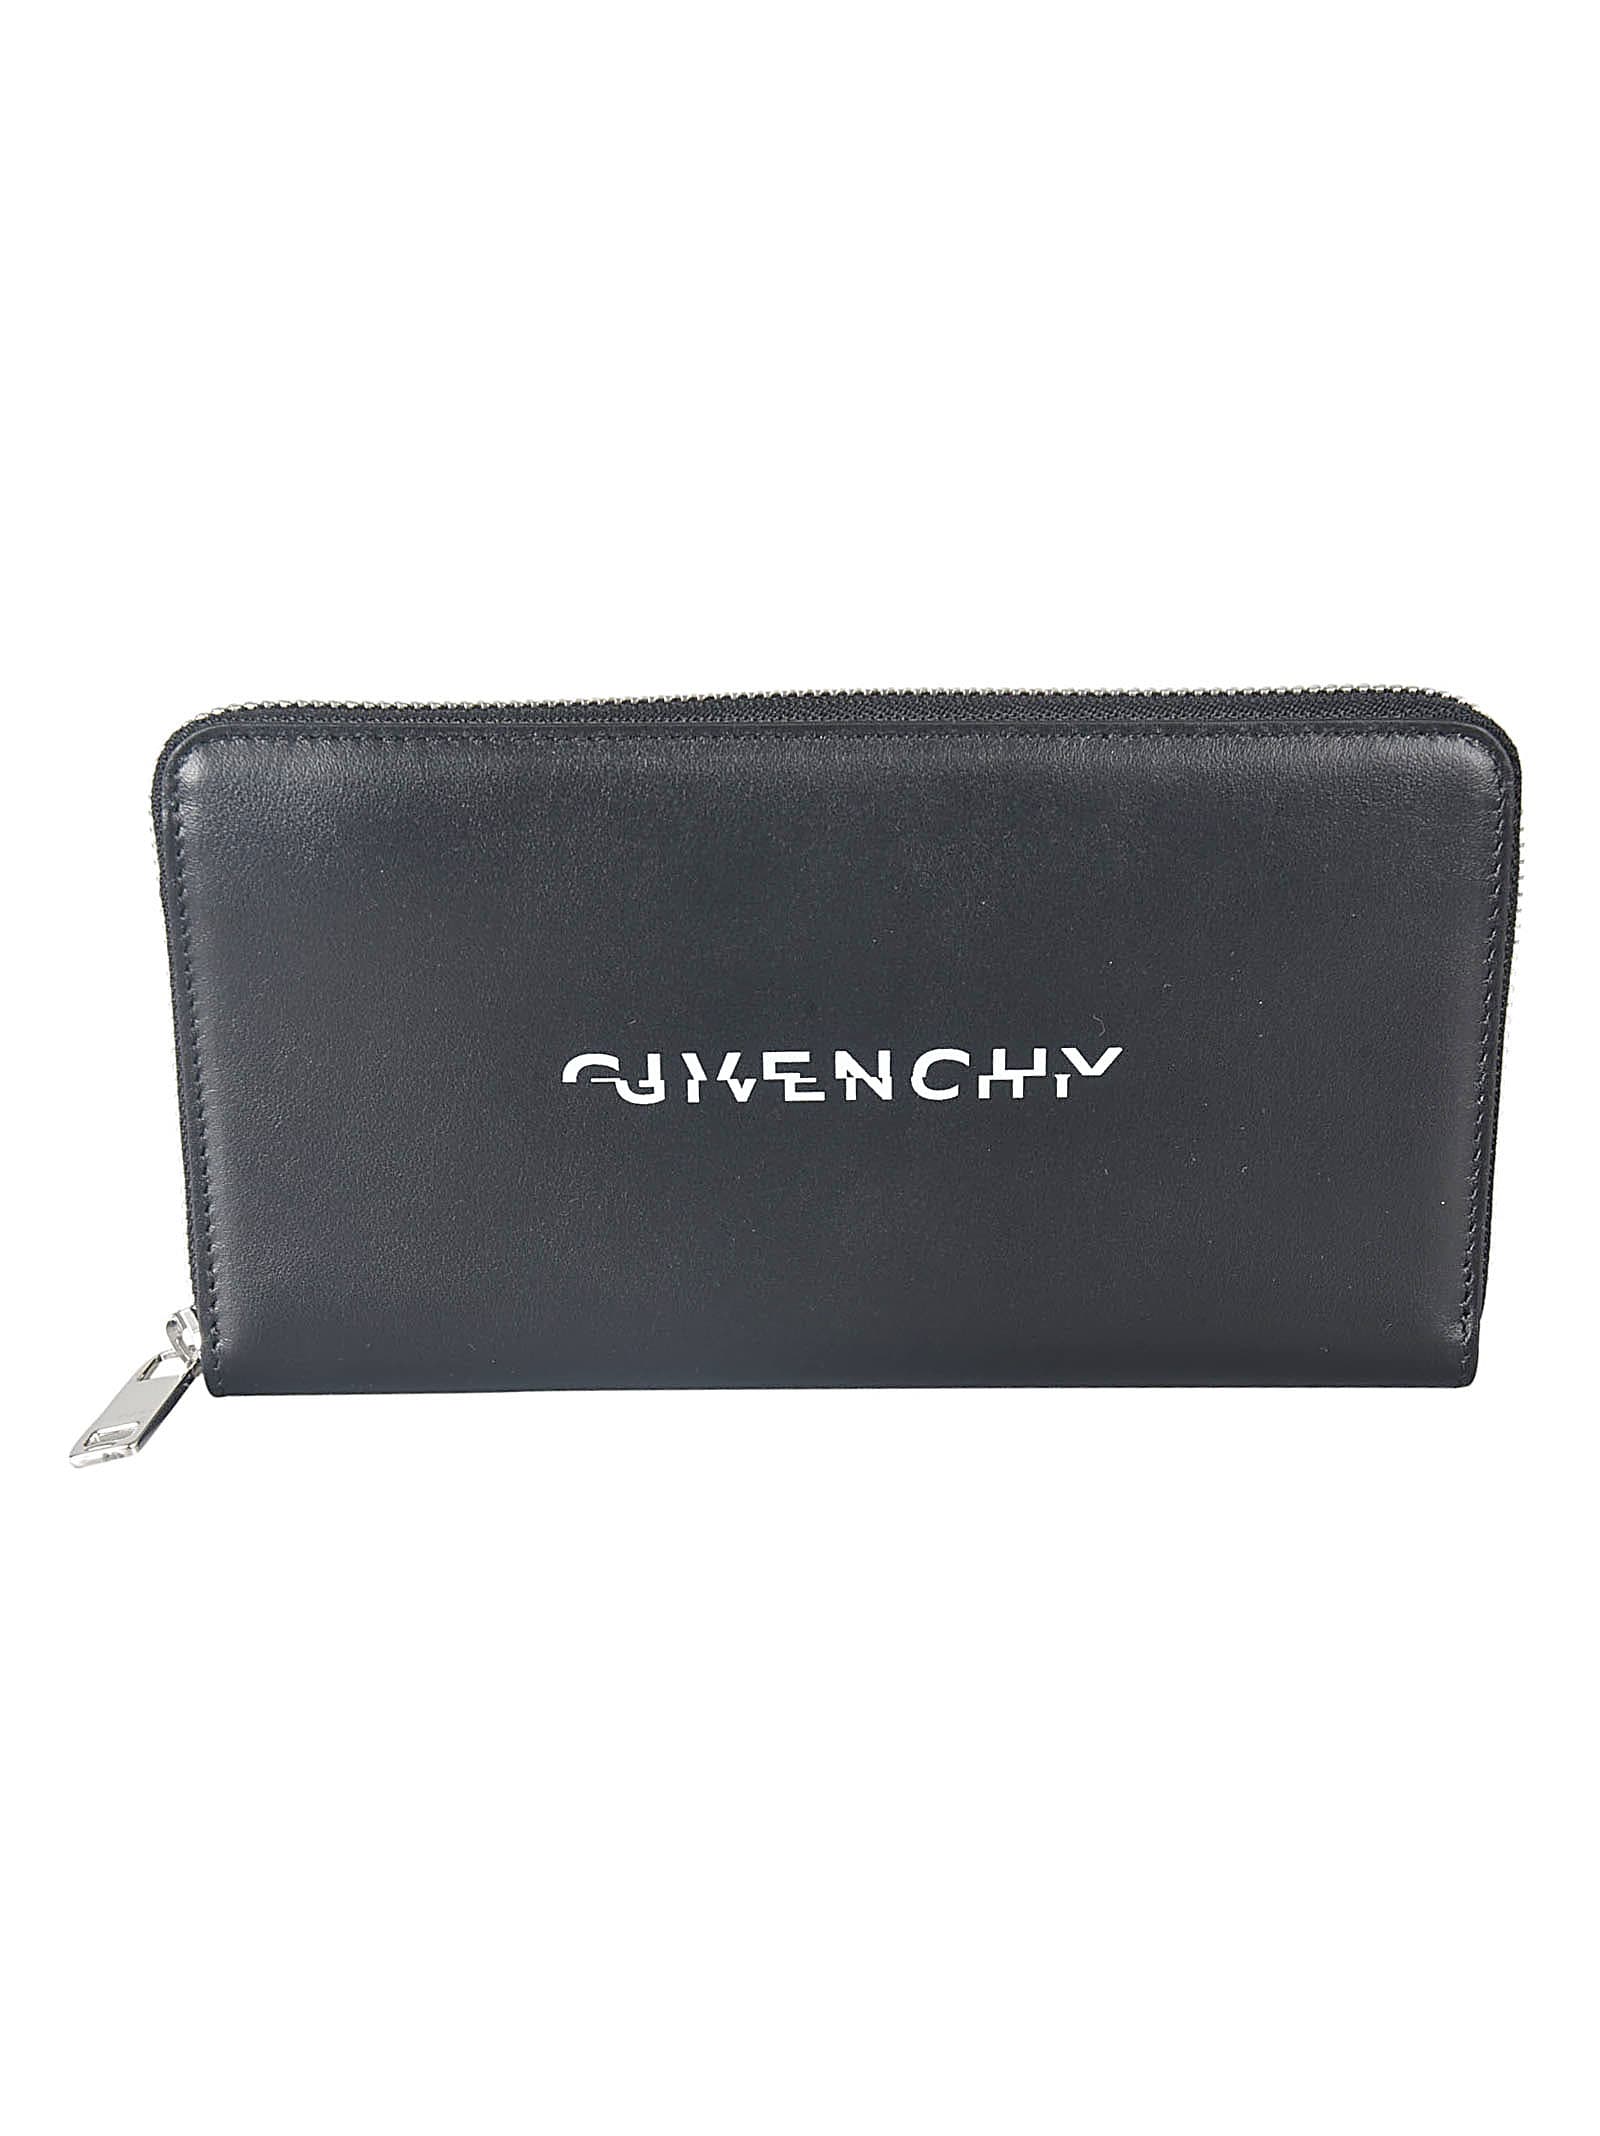 Givenchy Long Zipped Wallet In Black/white